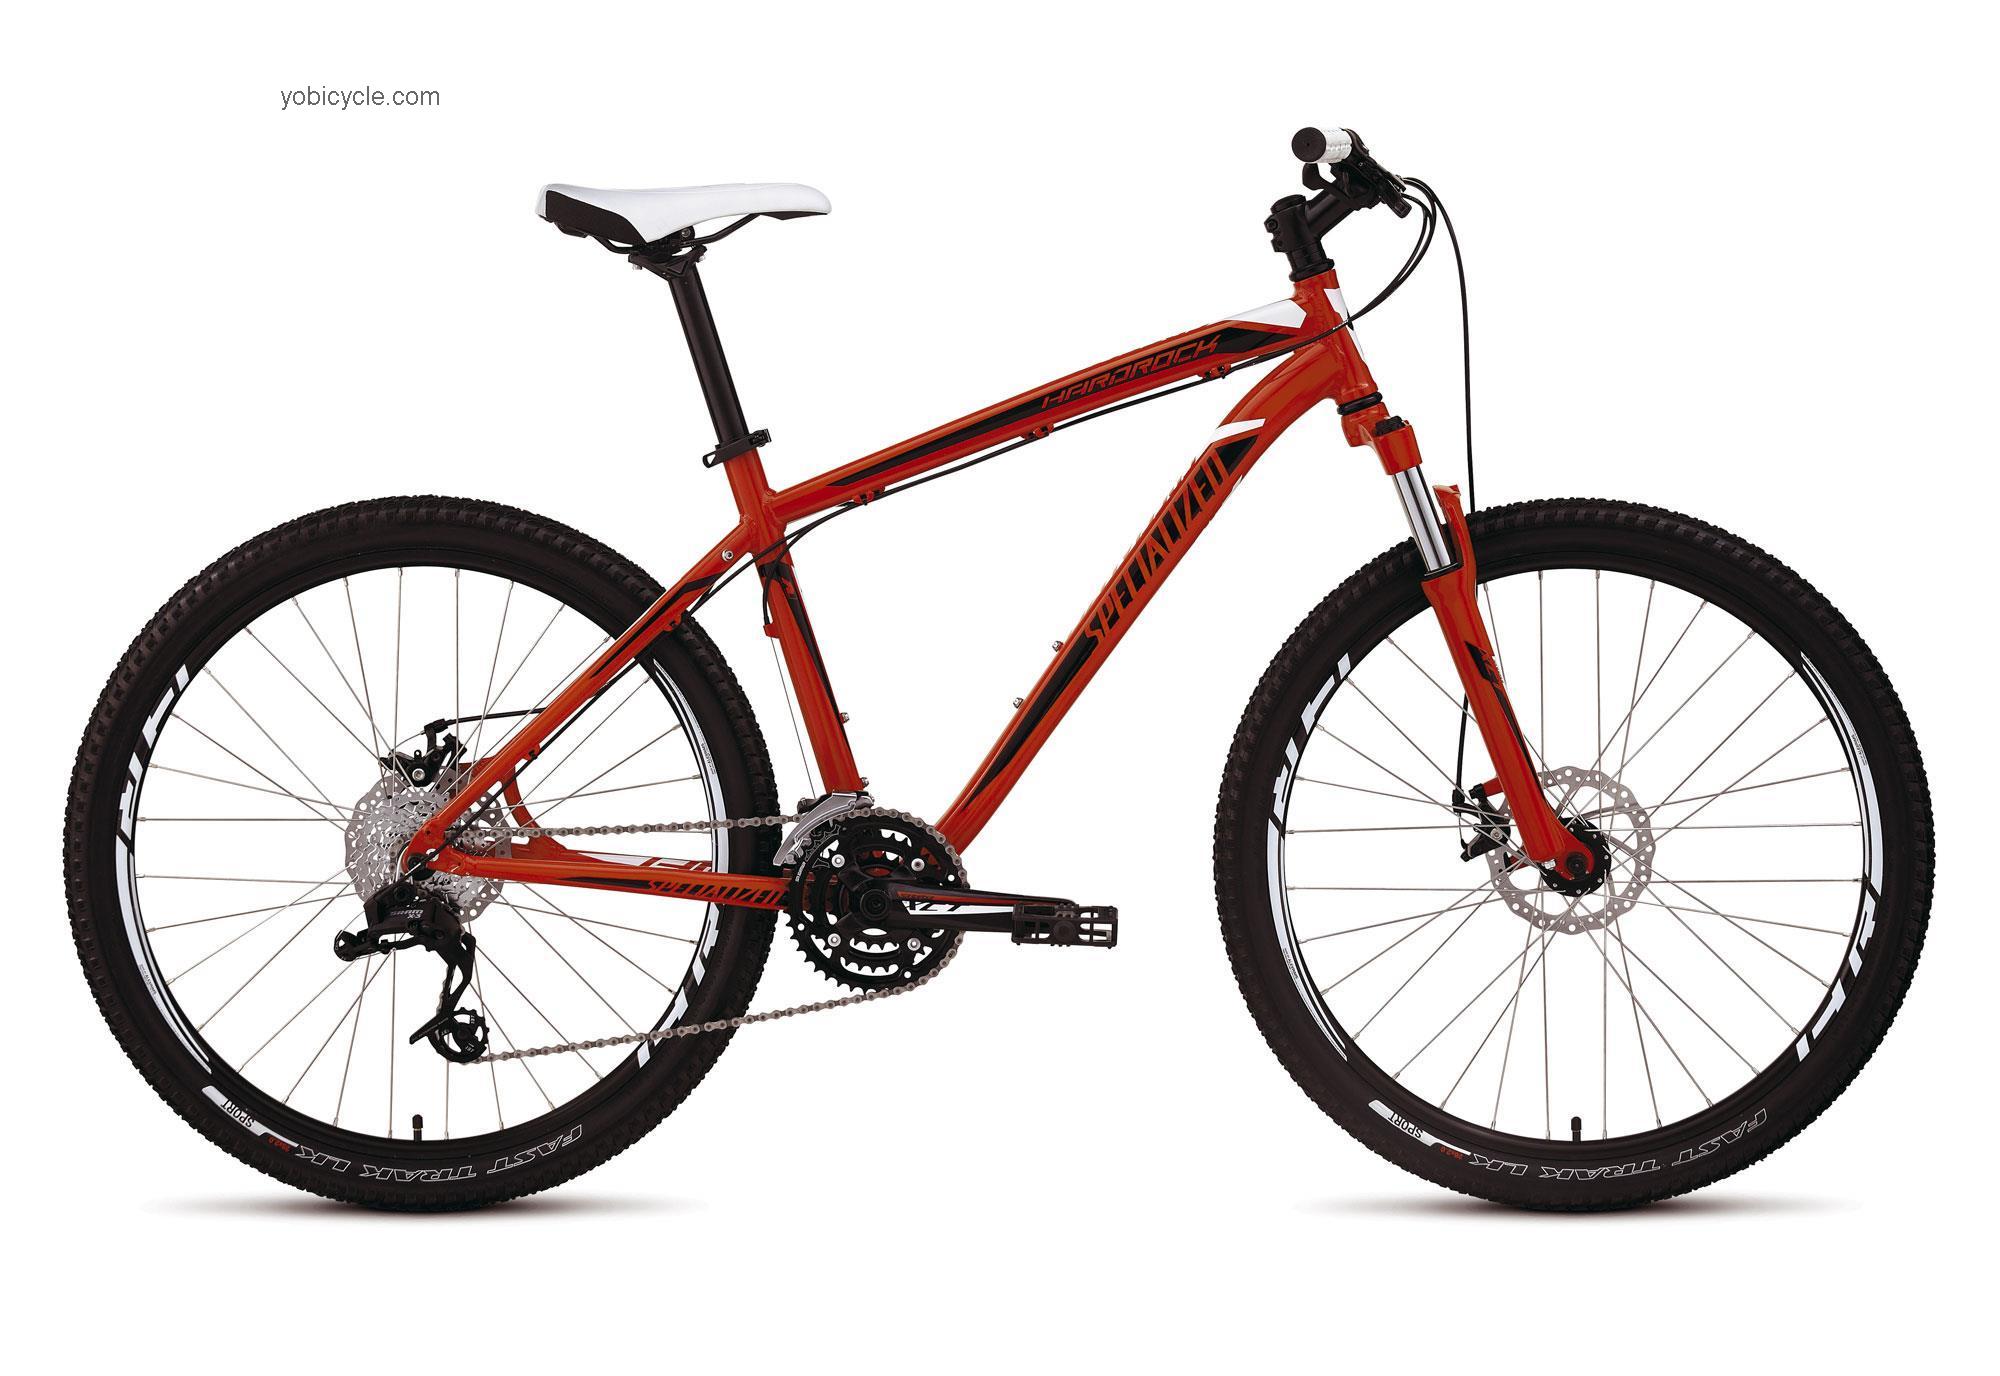 Specialized Hardrock Disc 2012 comparison online with competitors